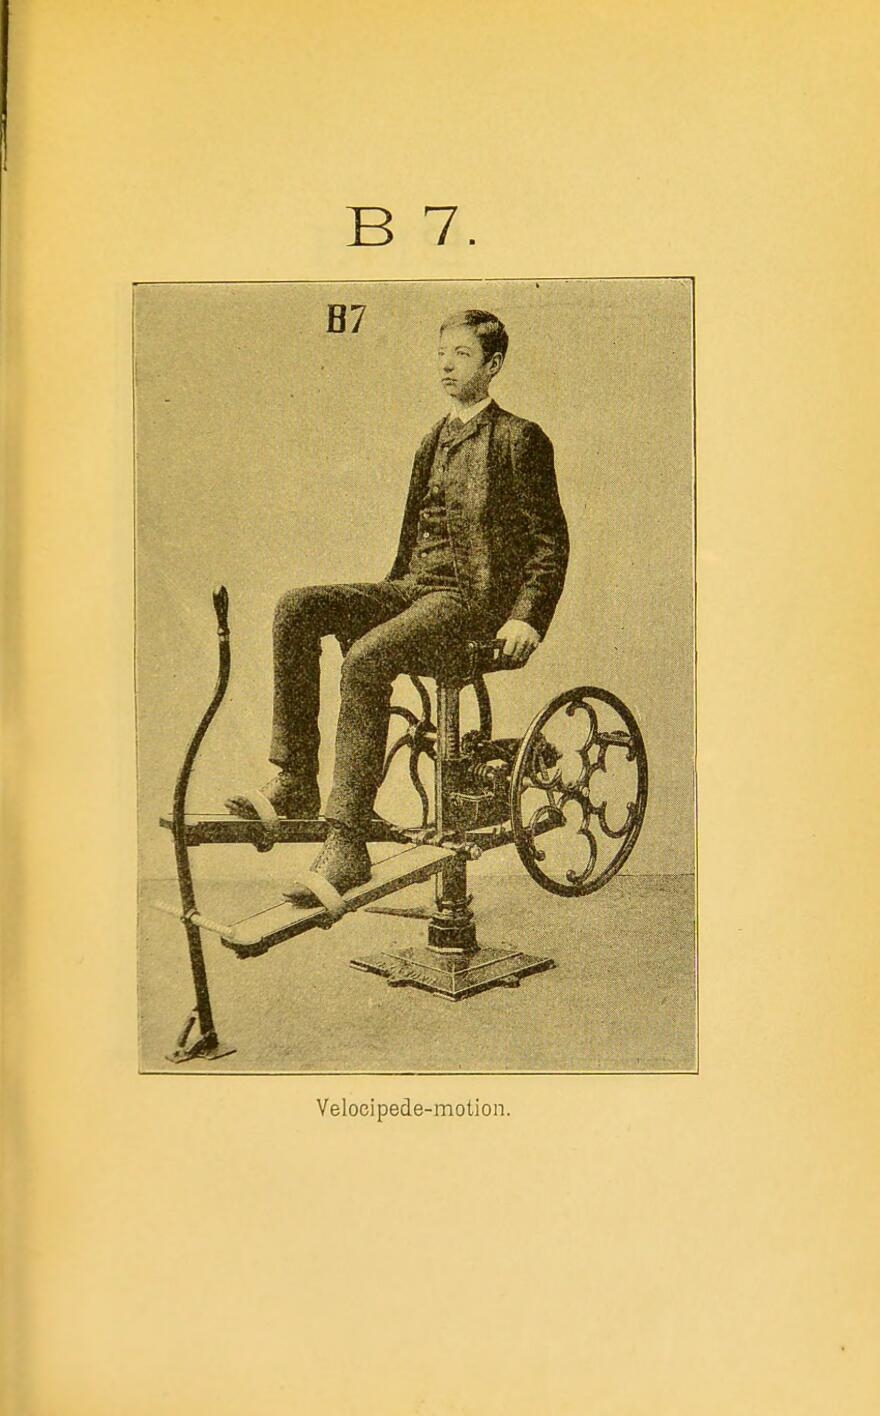 Black and white photograph from a book with yellowing pages showing a young man seated in a contraption with two wheels to each side of him, to which are affixed planks that his feet are strapped to for the purpose of exercise. Label reads "velocipede-motion".